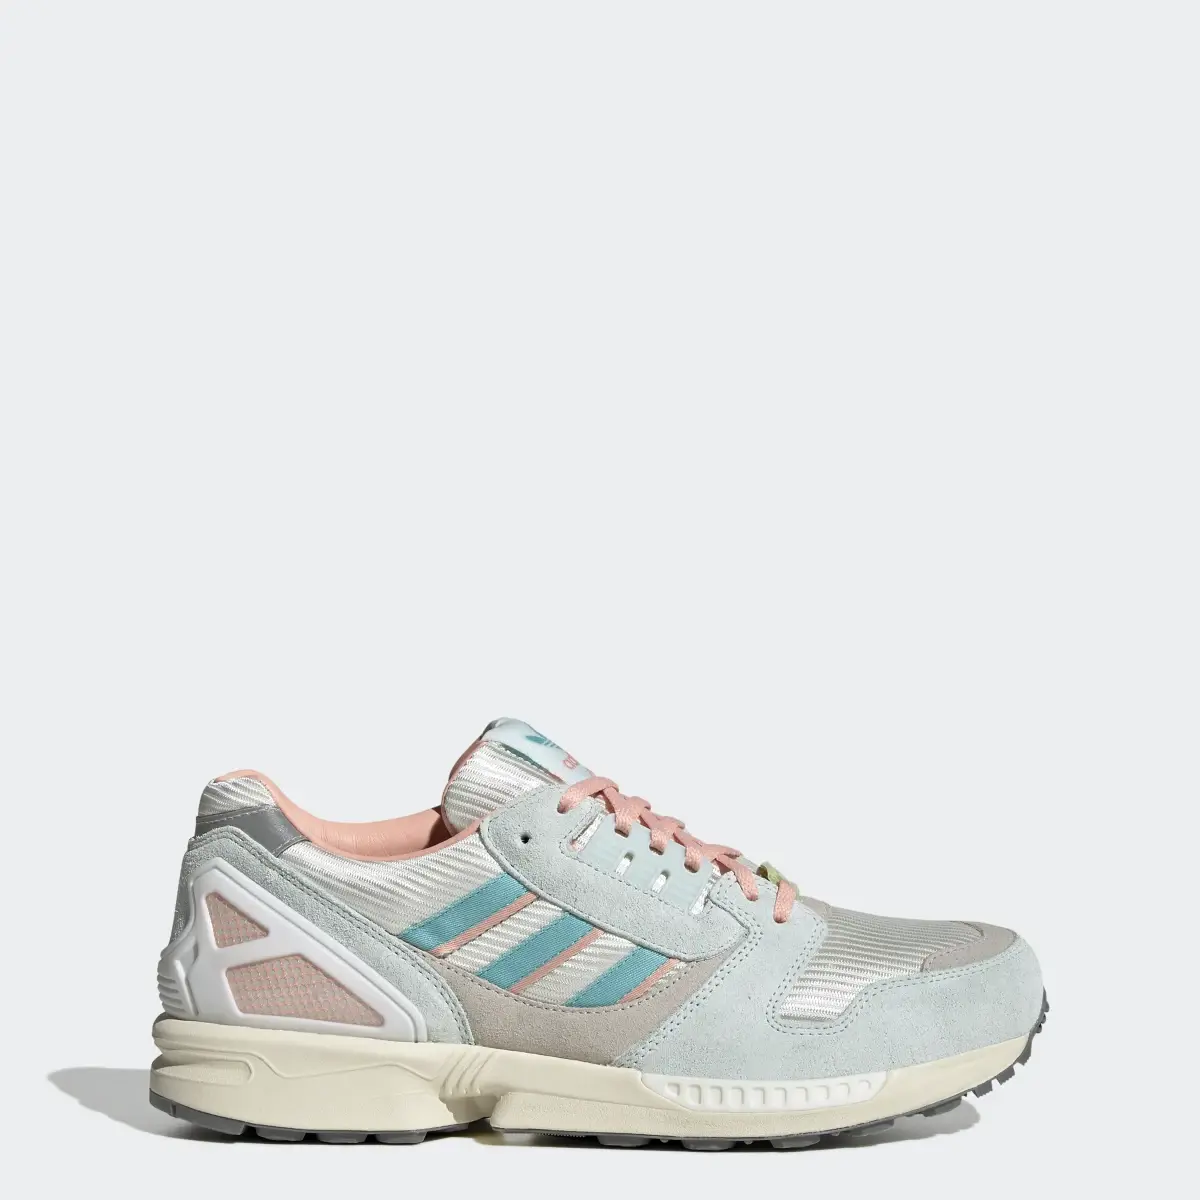 Adidas ZX 8000 Shoes. 1